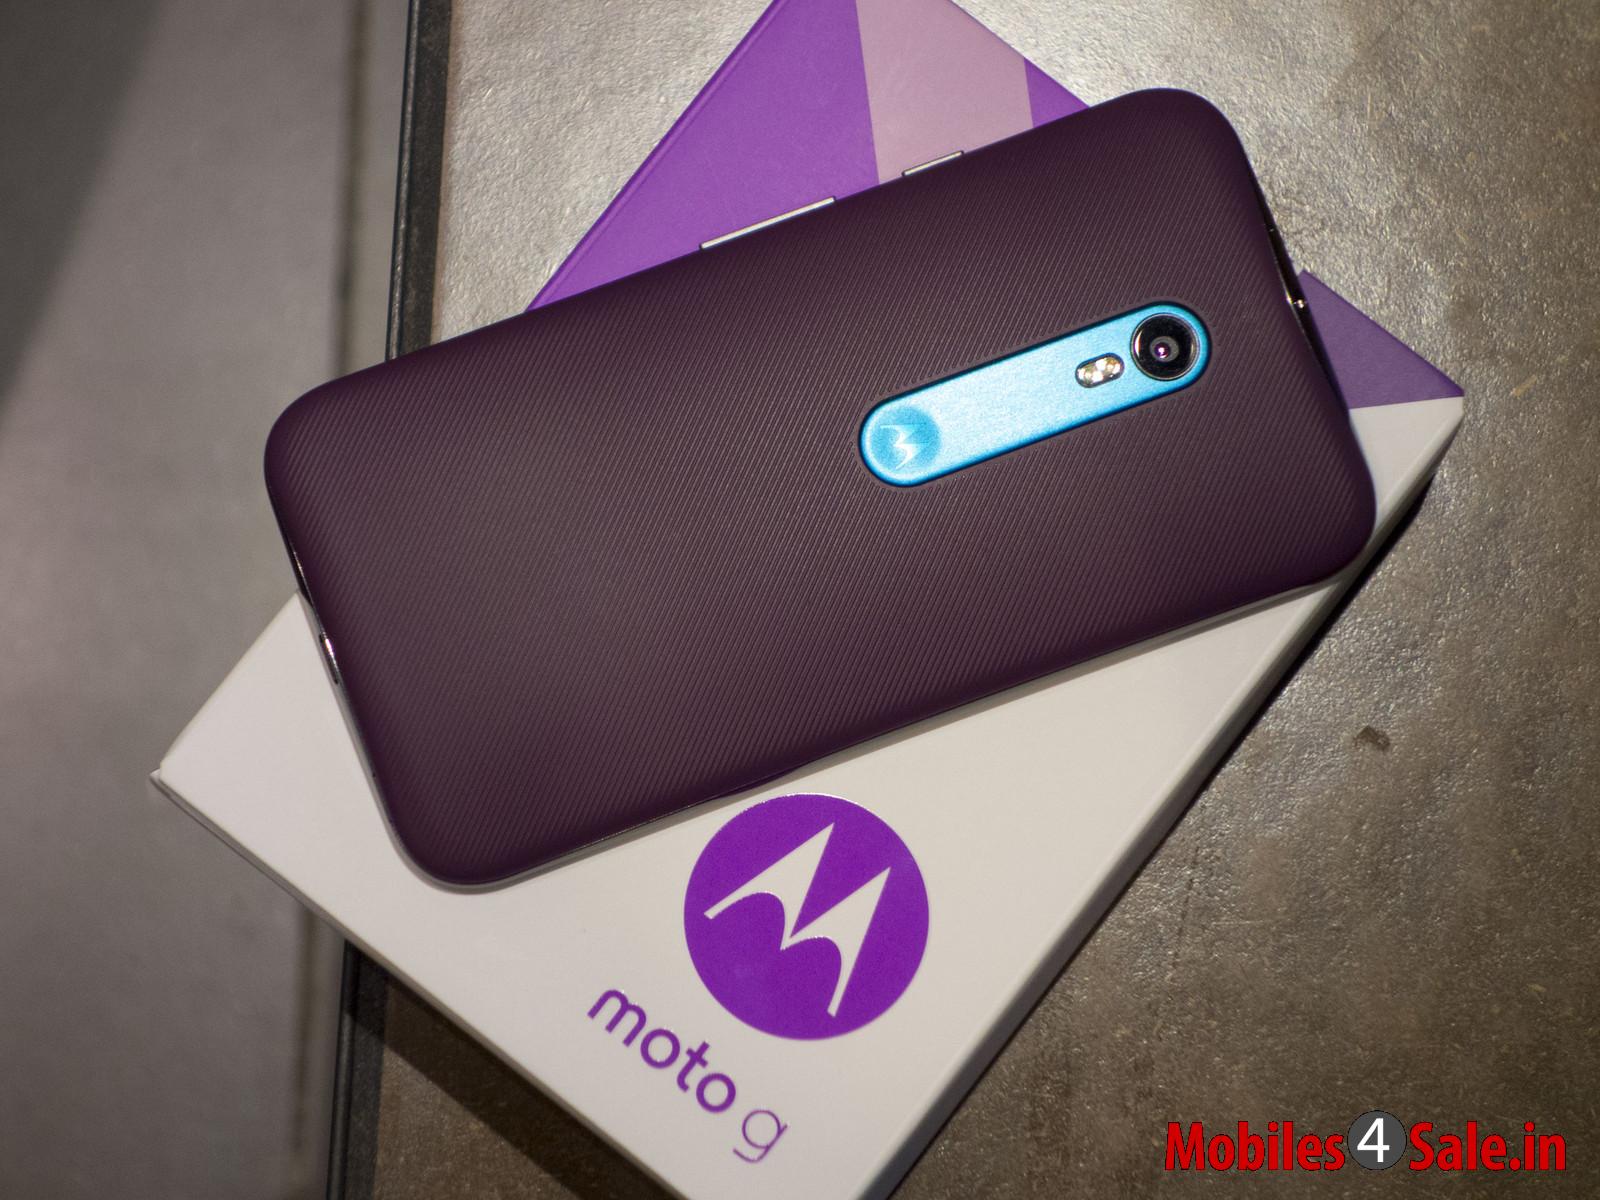 Moto G 2015 Features 13 Mp Camera